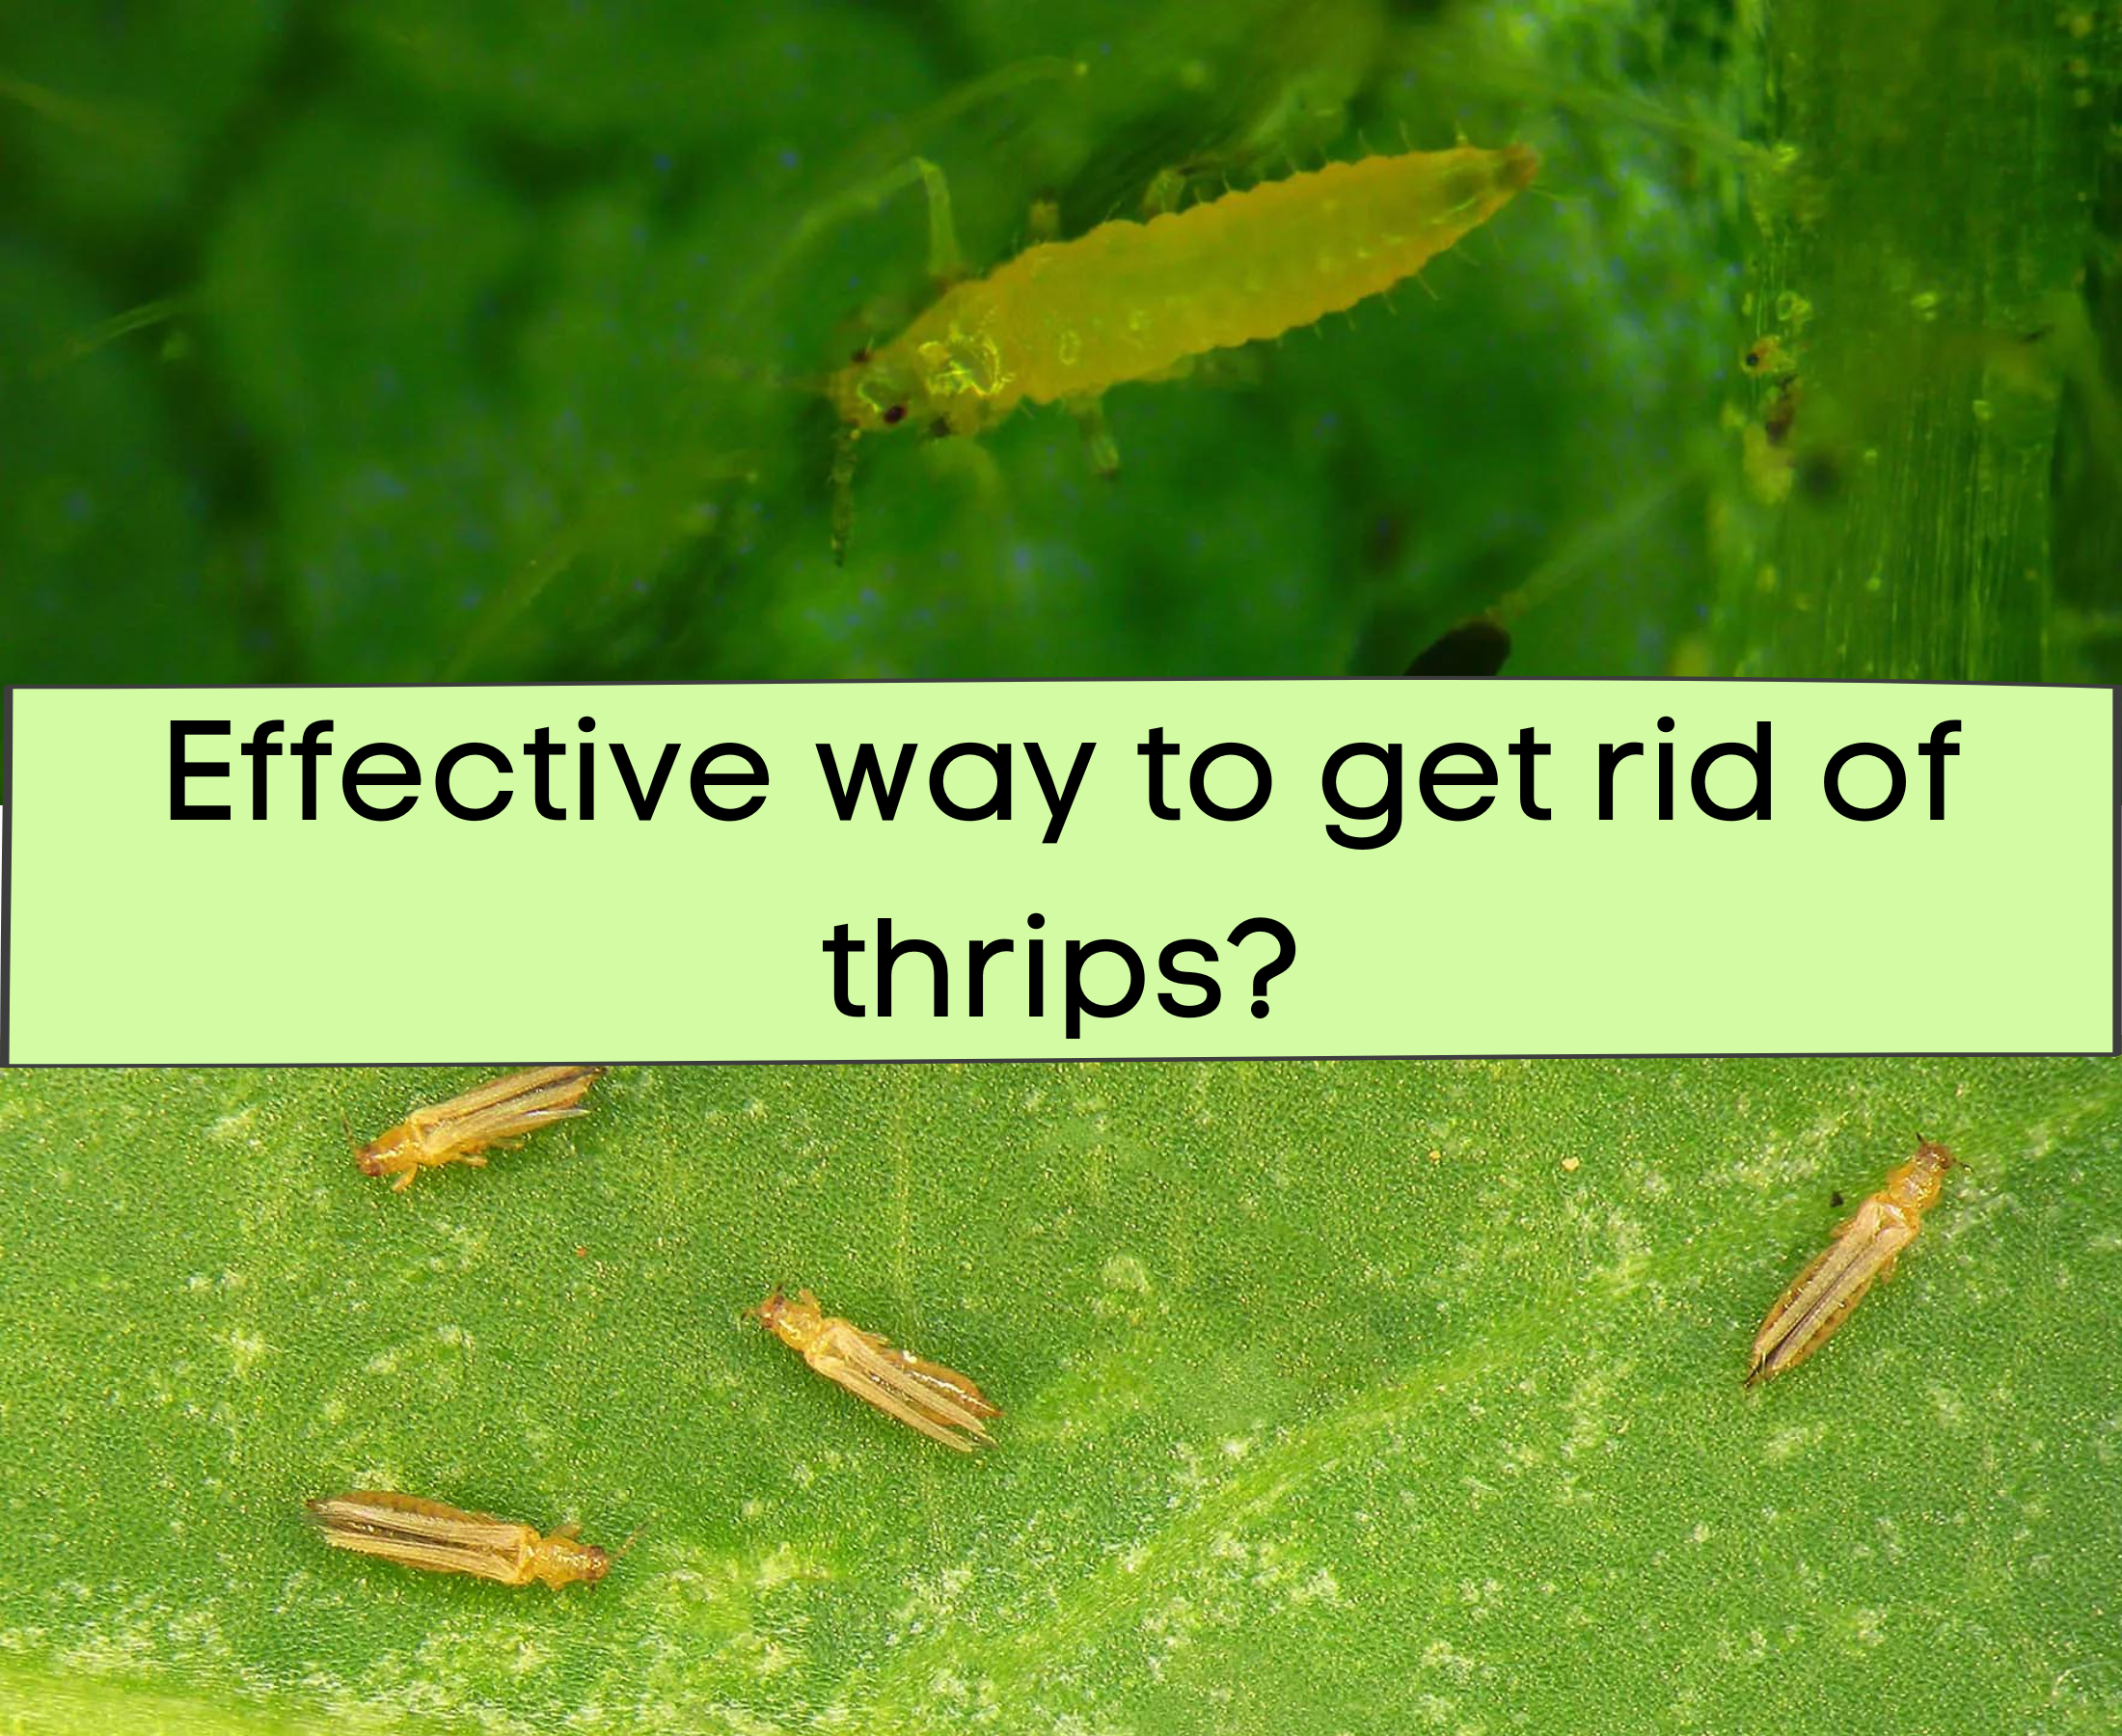 How to get rid of thrips (US)